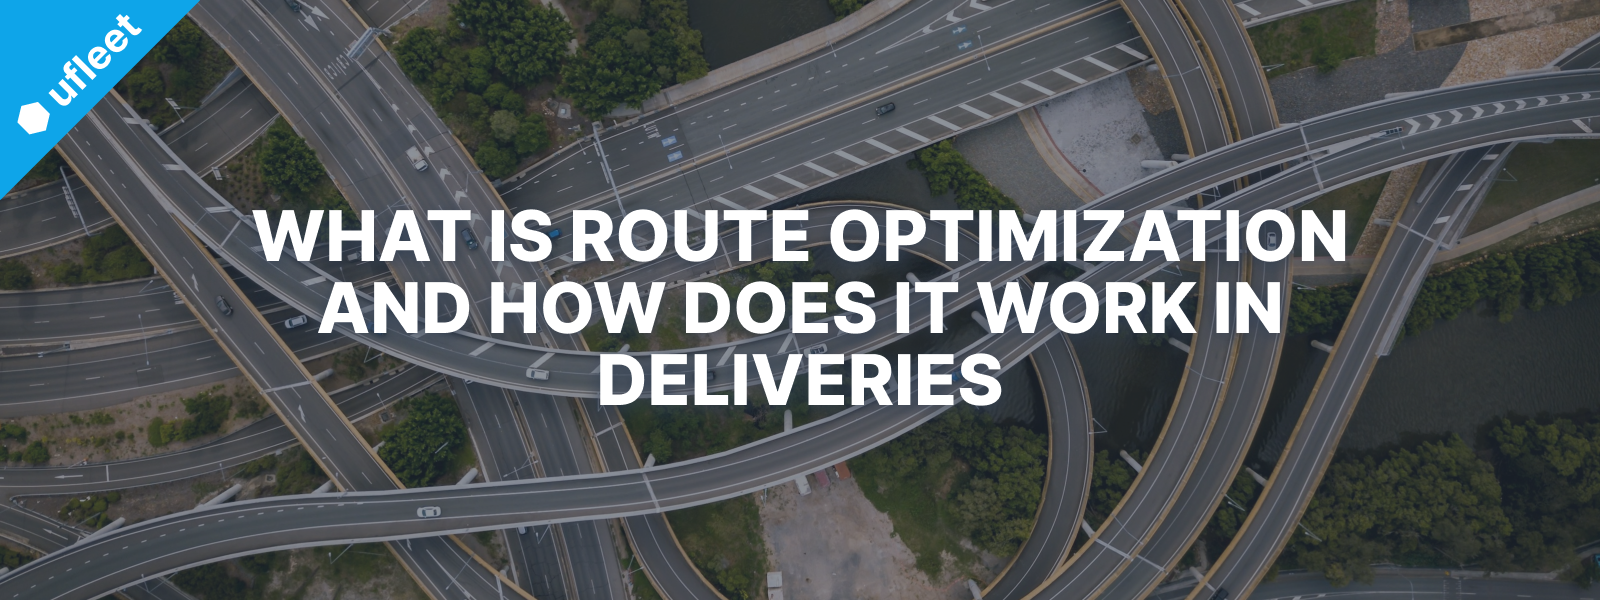 what is route optimization and how does it work